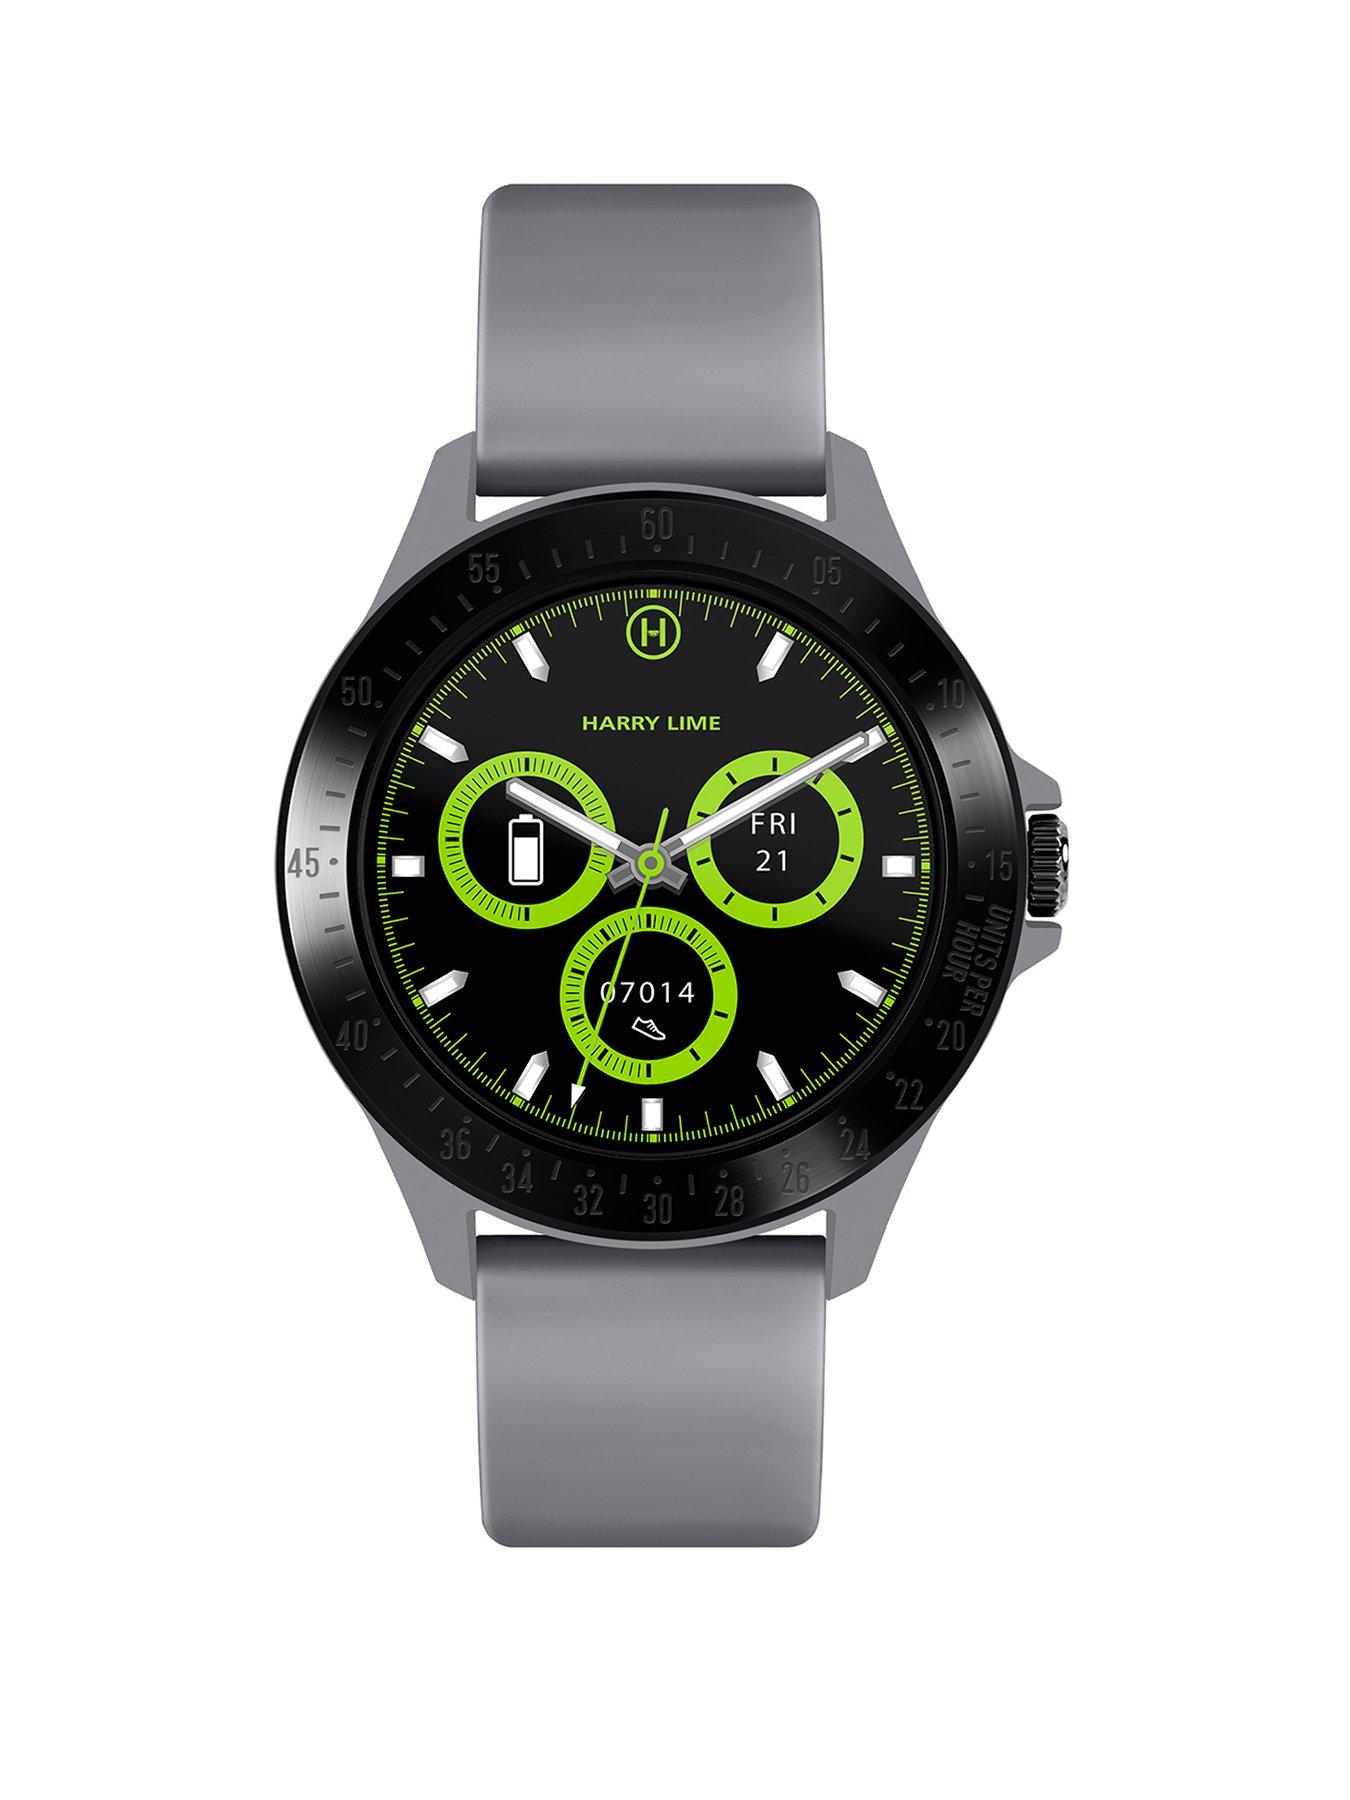 Jewellery & watches Harry Lime Fashion Smart Watch in Grey with Black Bezel